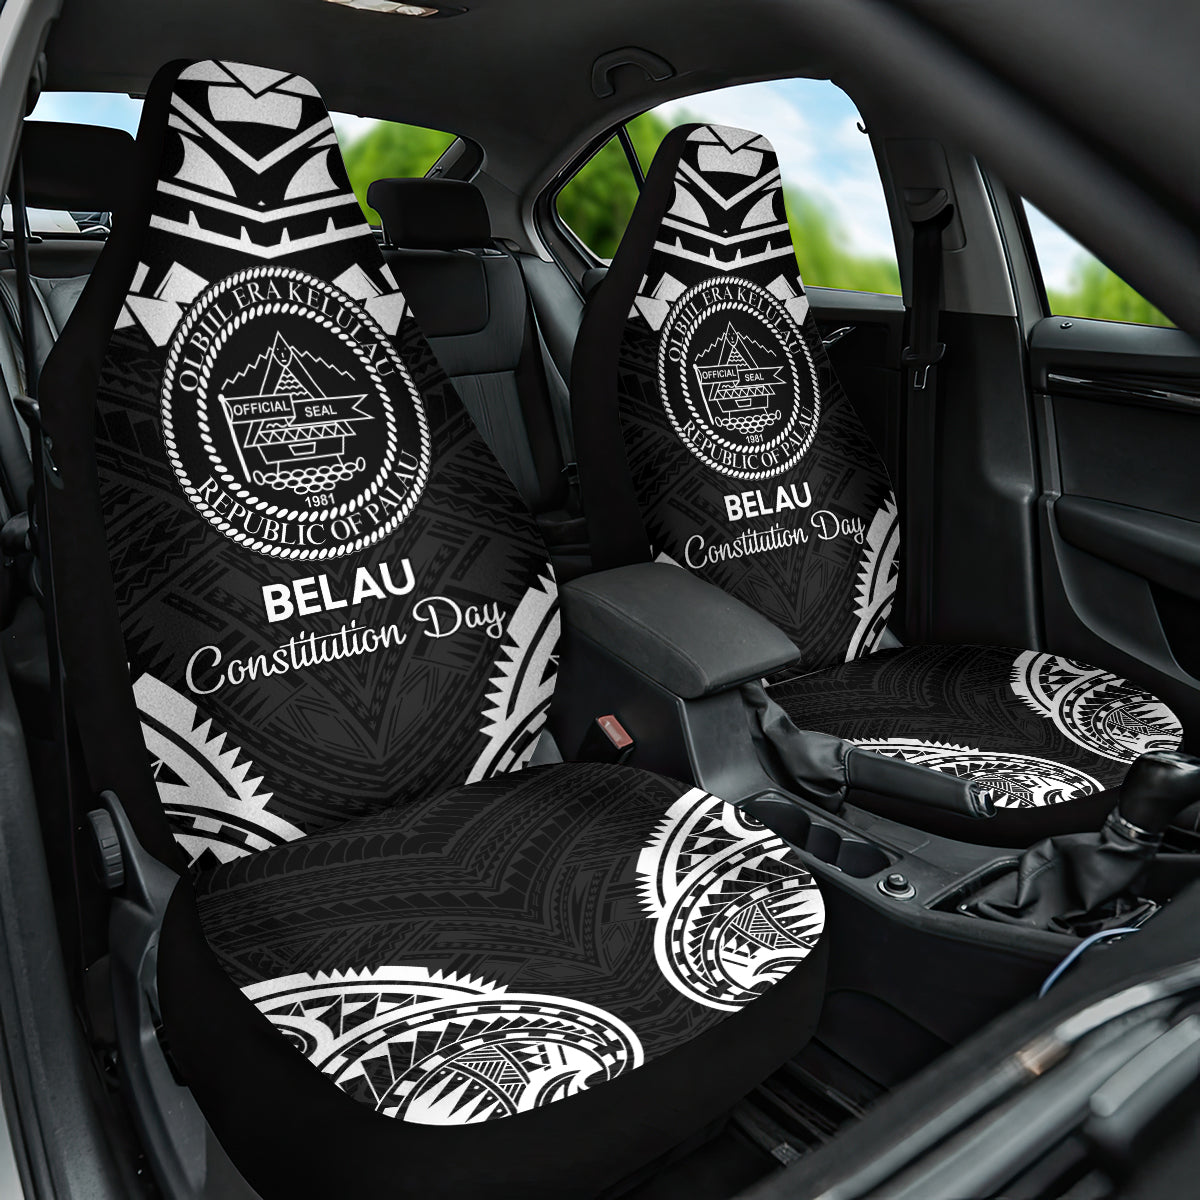 Palau Constitution Day Car Seat Cover Belau Seal With Polynesian Pattern - Black